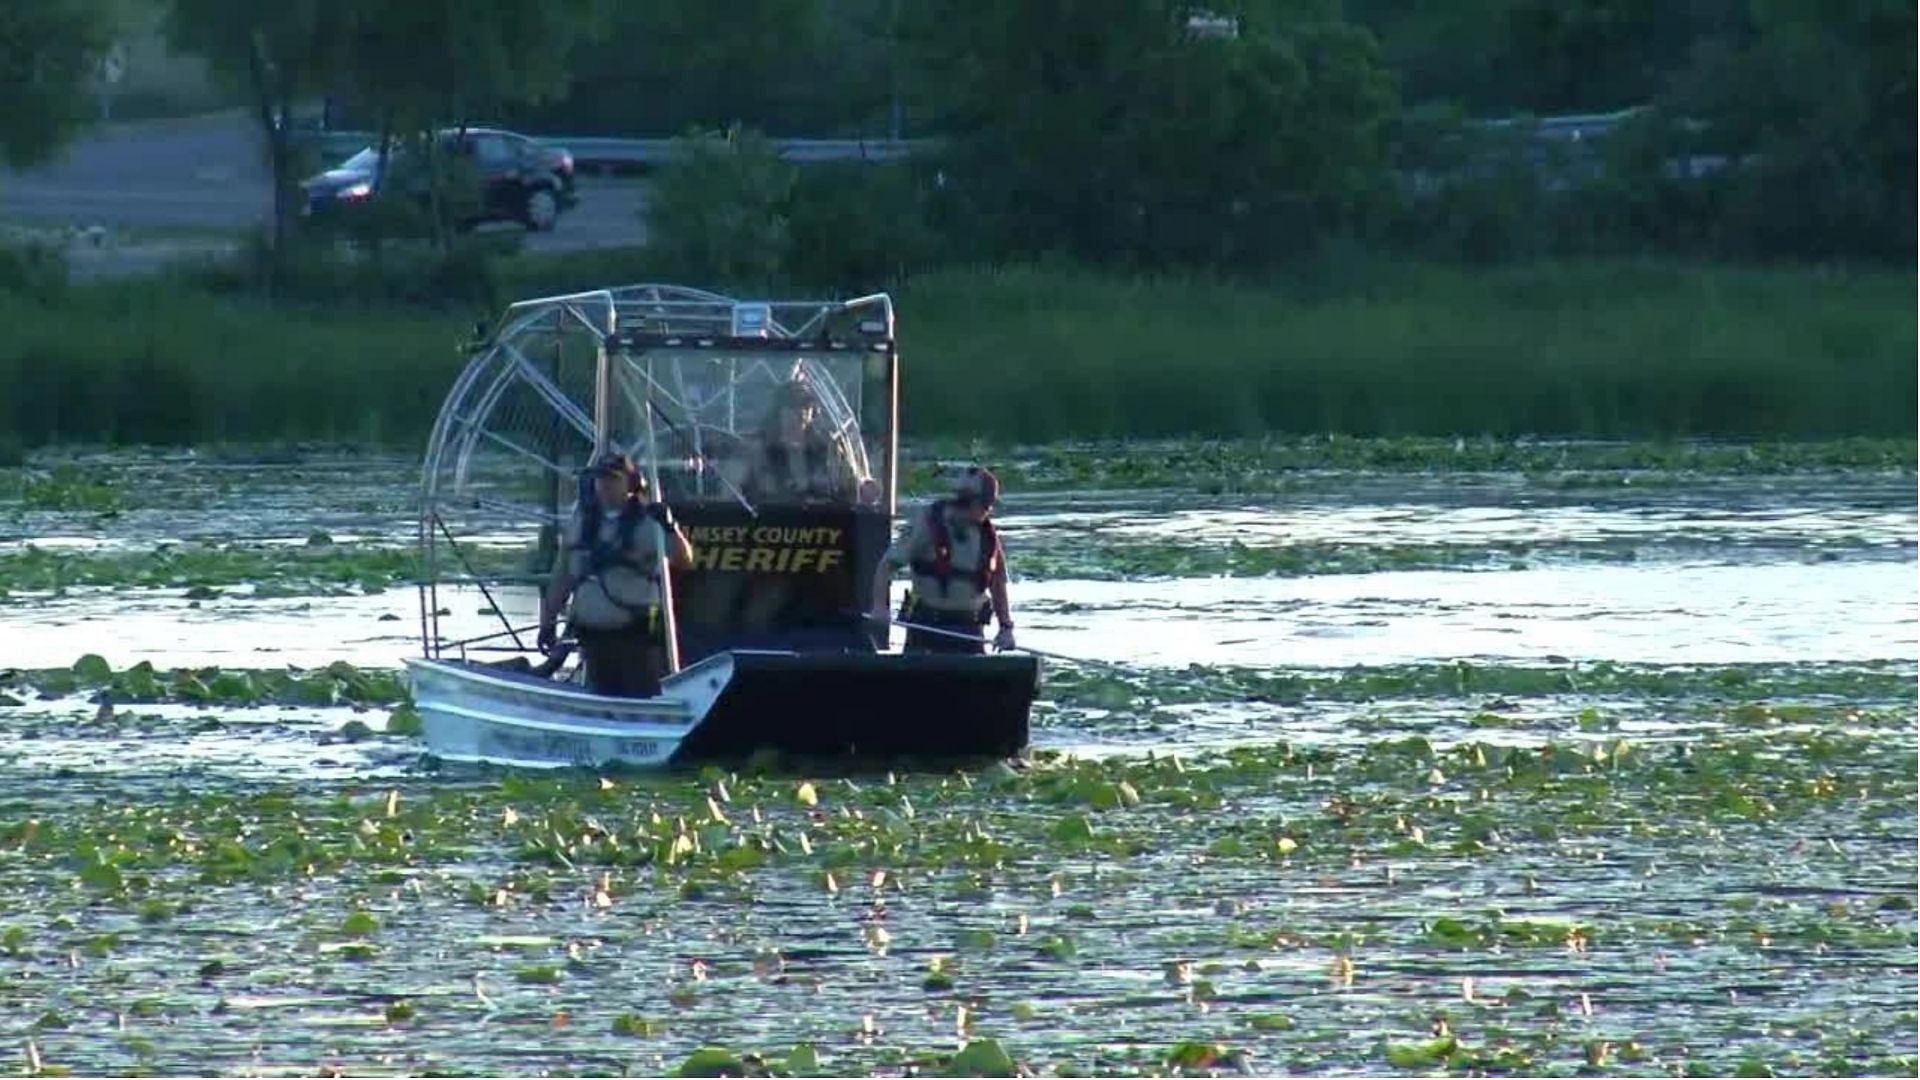 Police are searching Lake Vadnais in Minnesota for the bodies of missing children in a suspected &quot;triple homicide&quot; (Image via Twitter @/andrealyonnews)